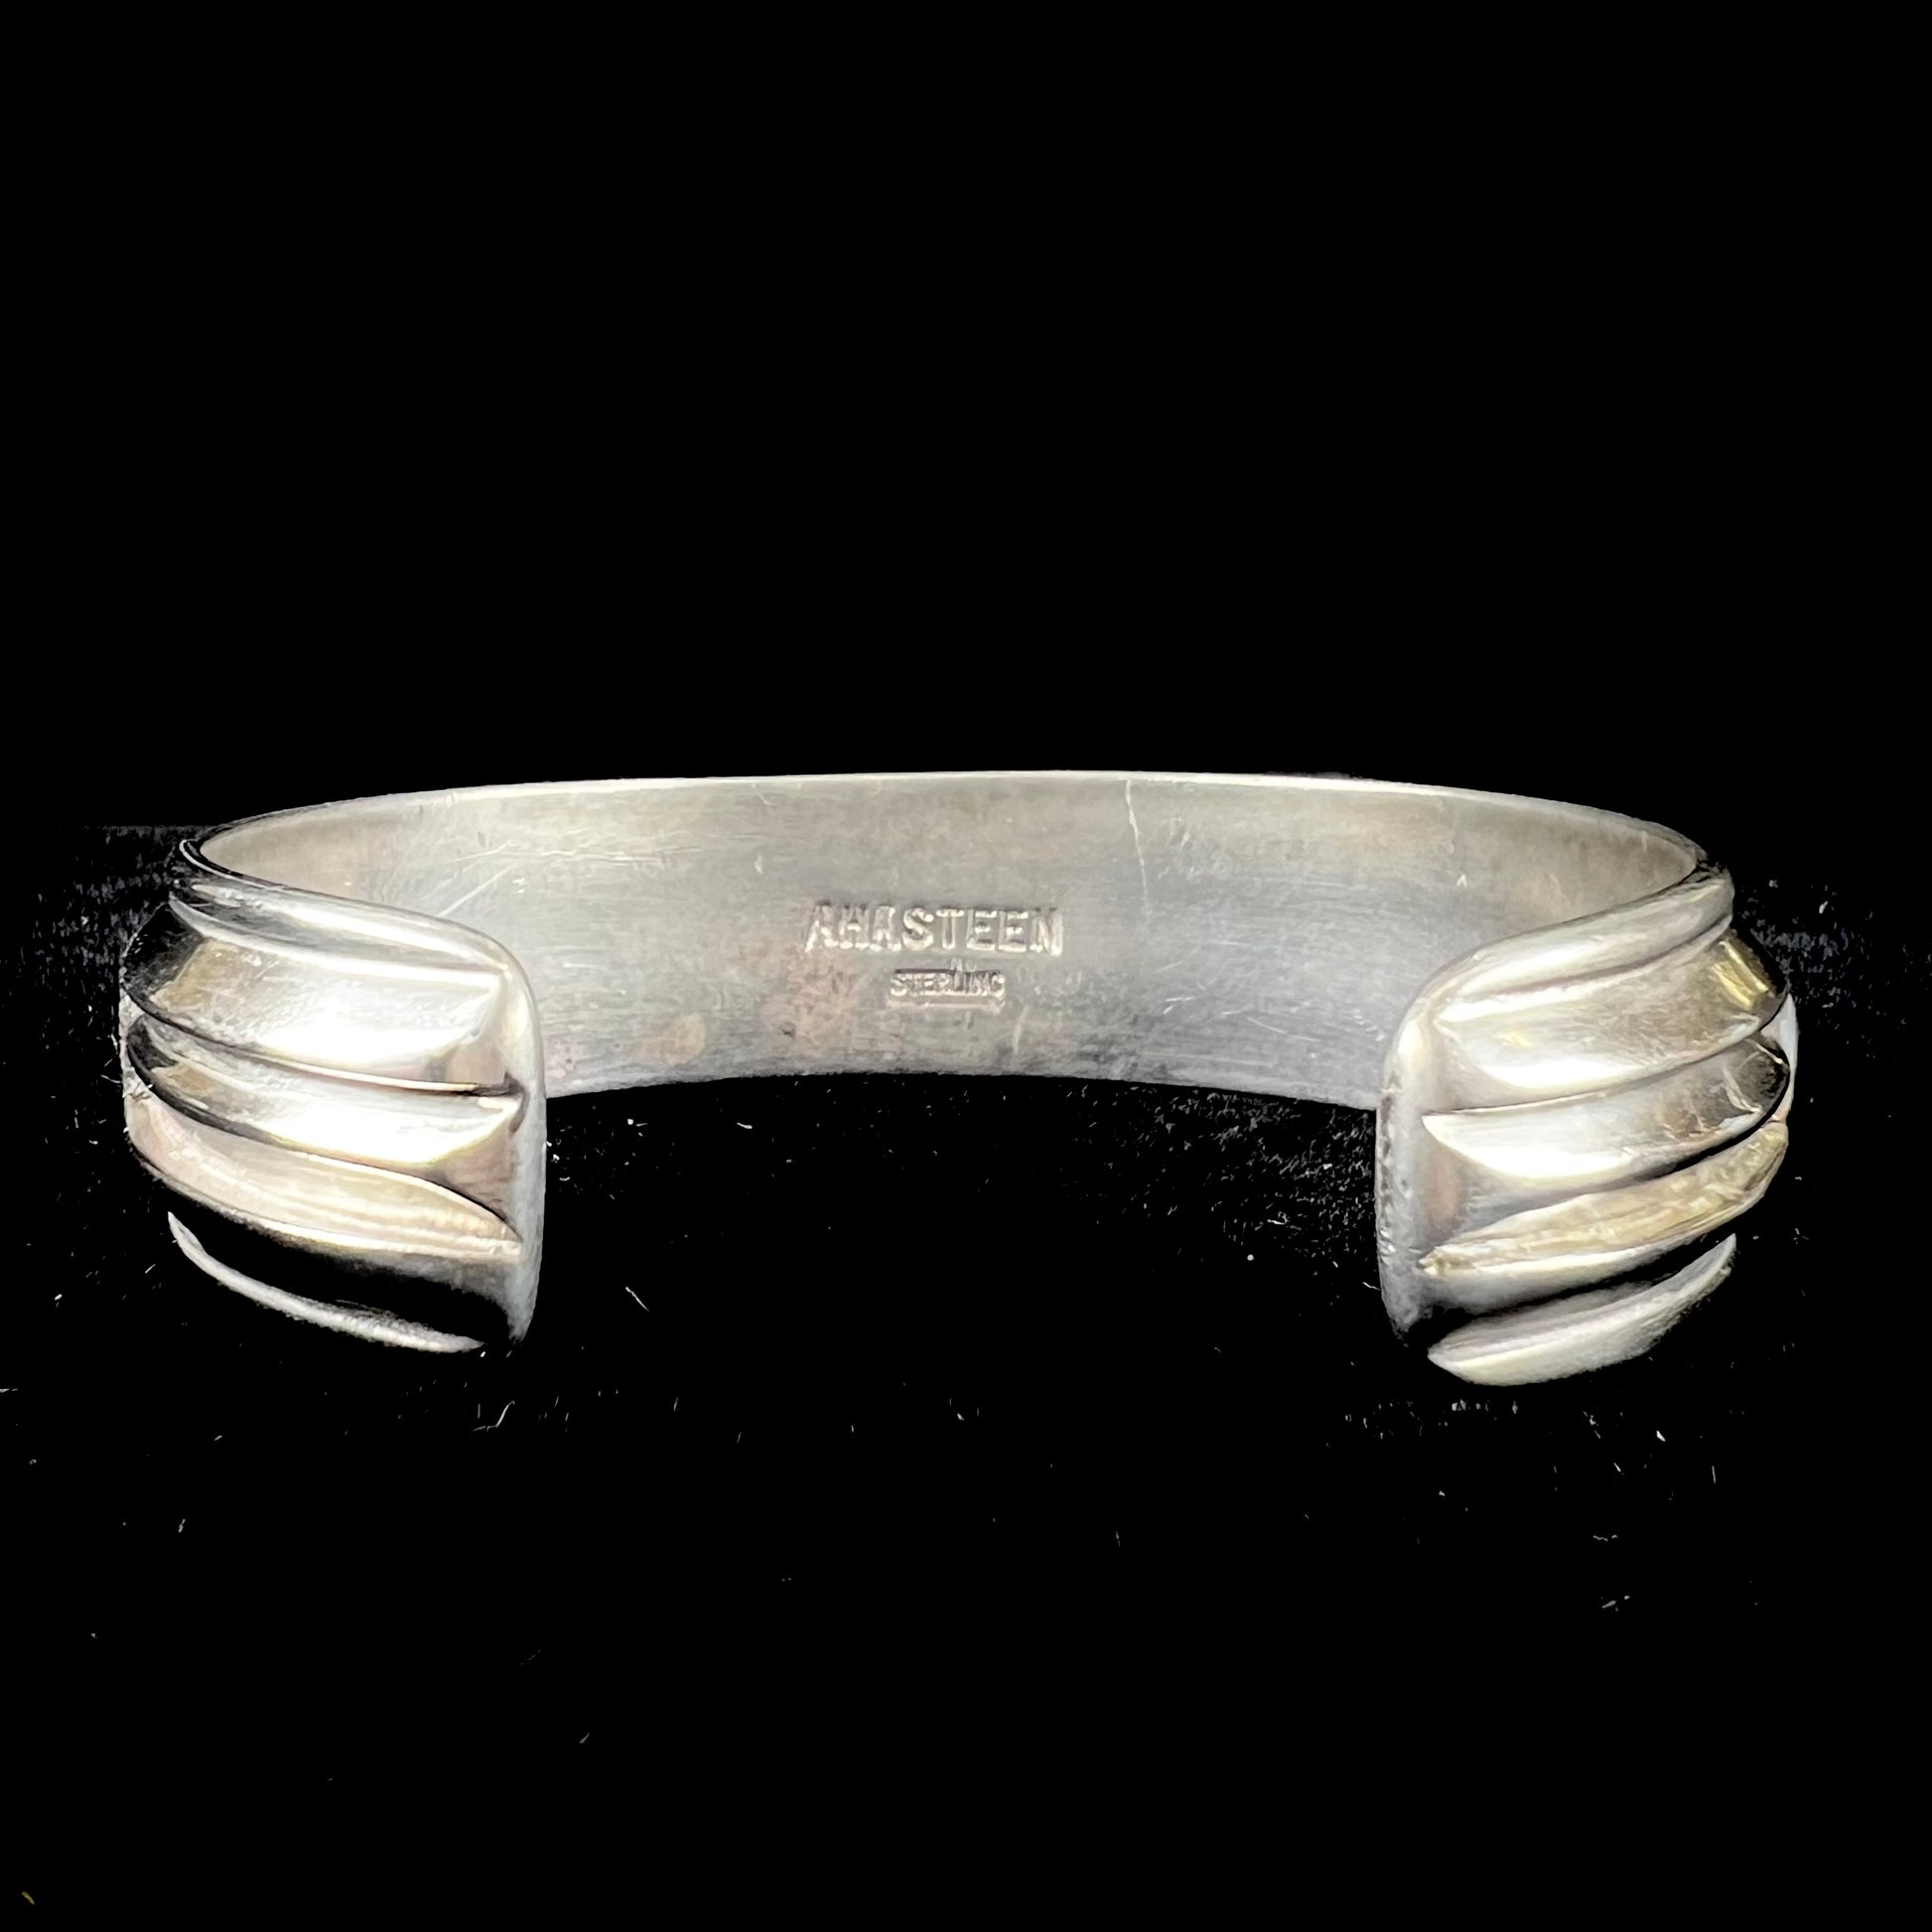 A vintage sterling silver stone inlay cuff bracelet, signed "AHASTEEN" by the Navajo artsit.